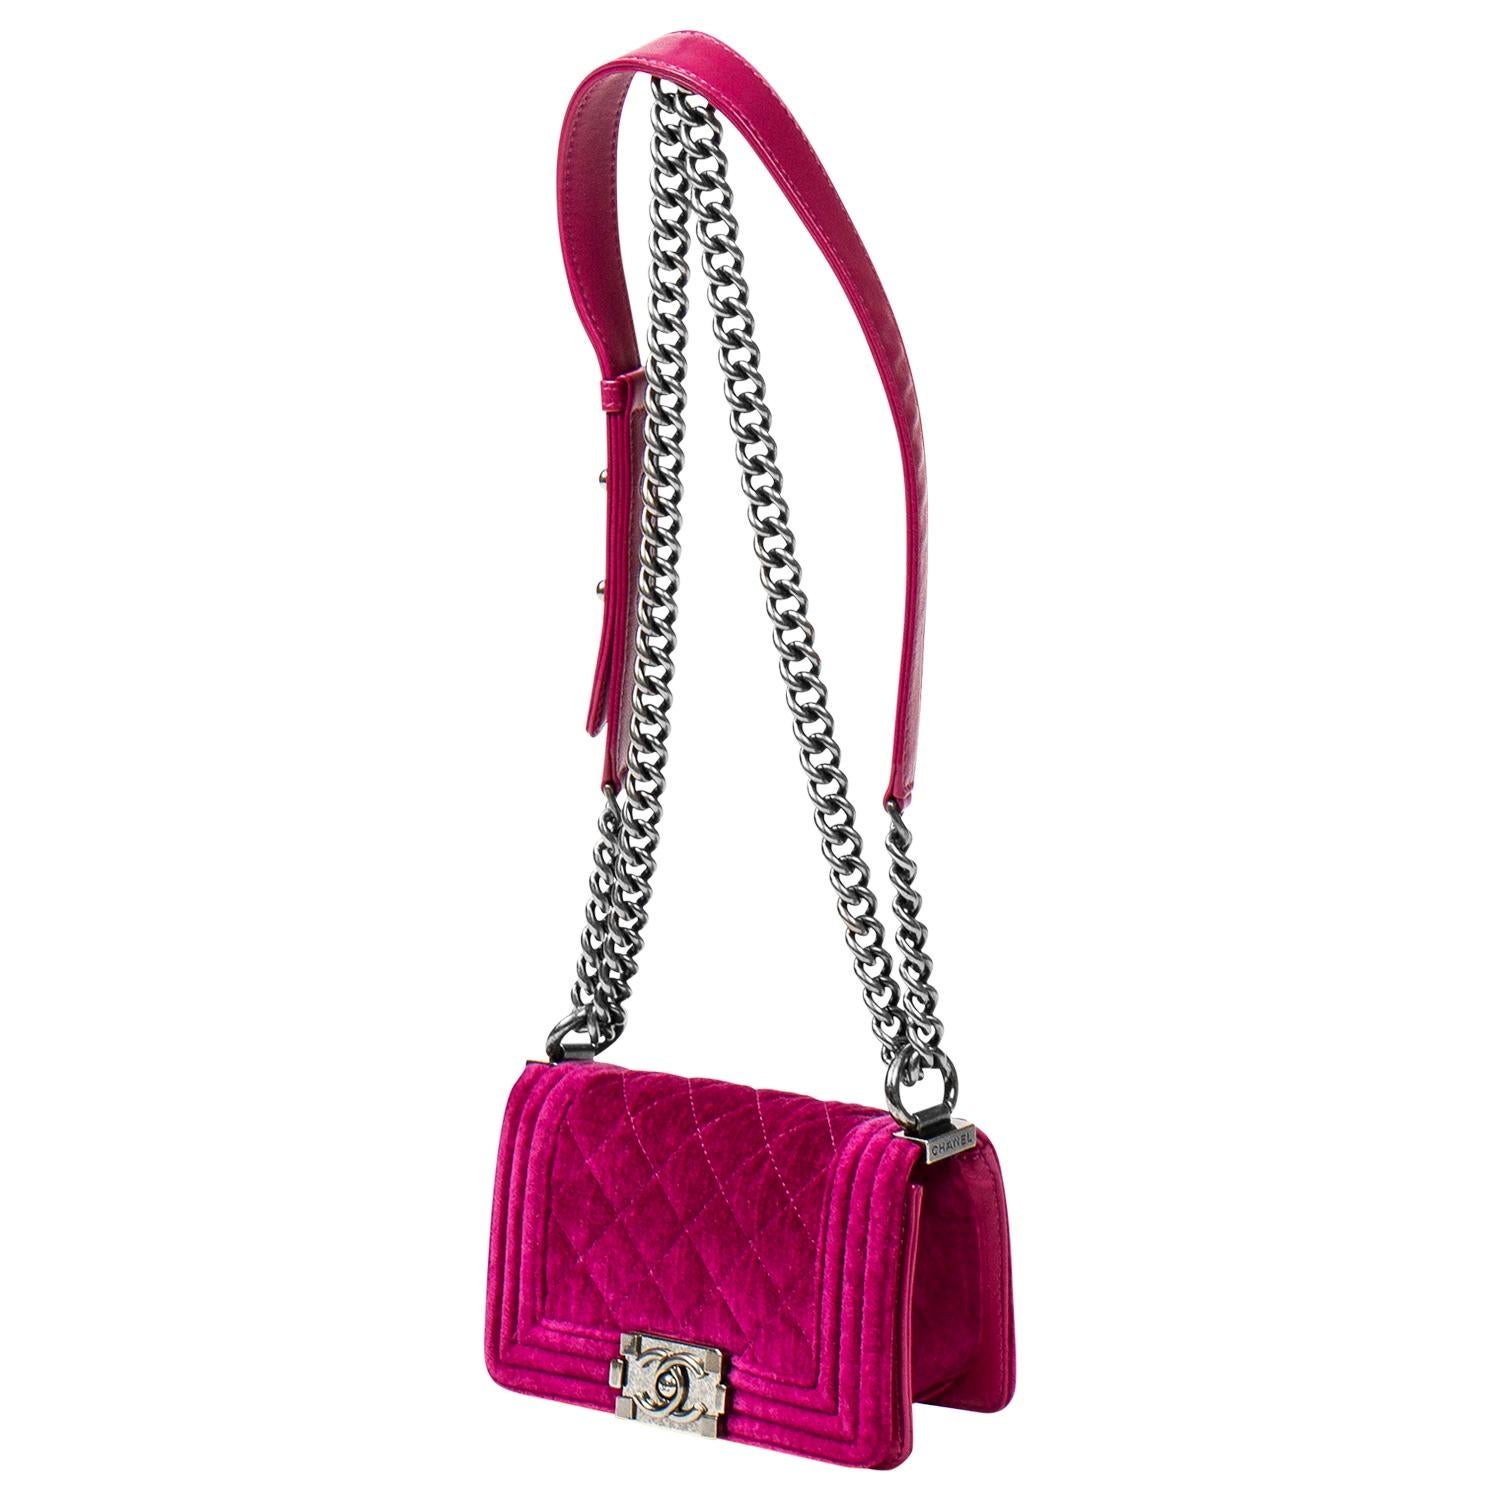 Okay this one is way too cute. Boy Bags were released in 2011 so this is one of the originals by the late Karl Lagerfeld! This iconic and NEVER CARRIED 2012 Chanel mini Boy Bag is rendered in bright pink fuchsia velvet with signature diamond